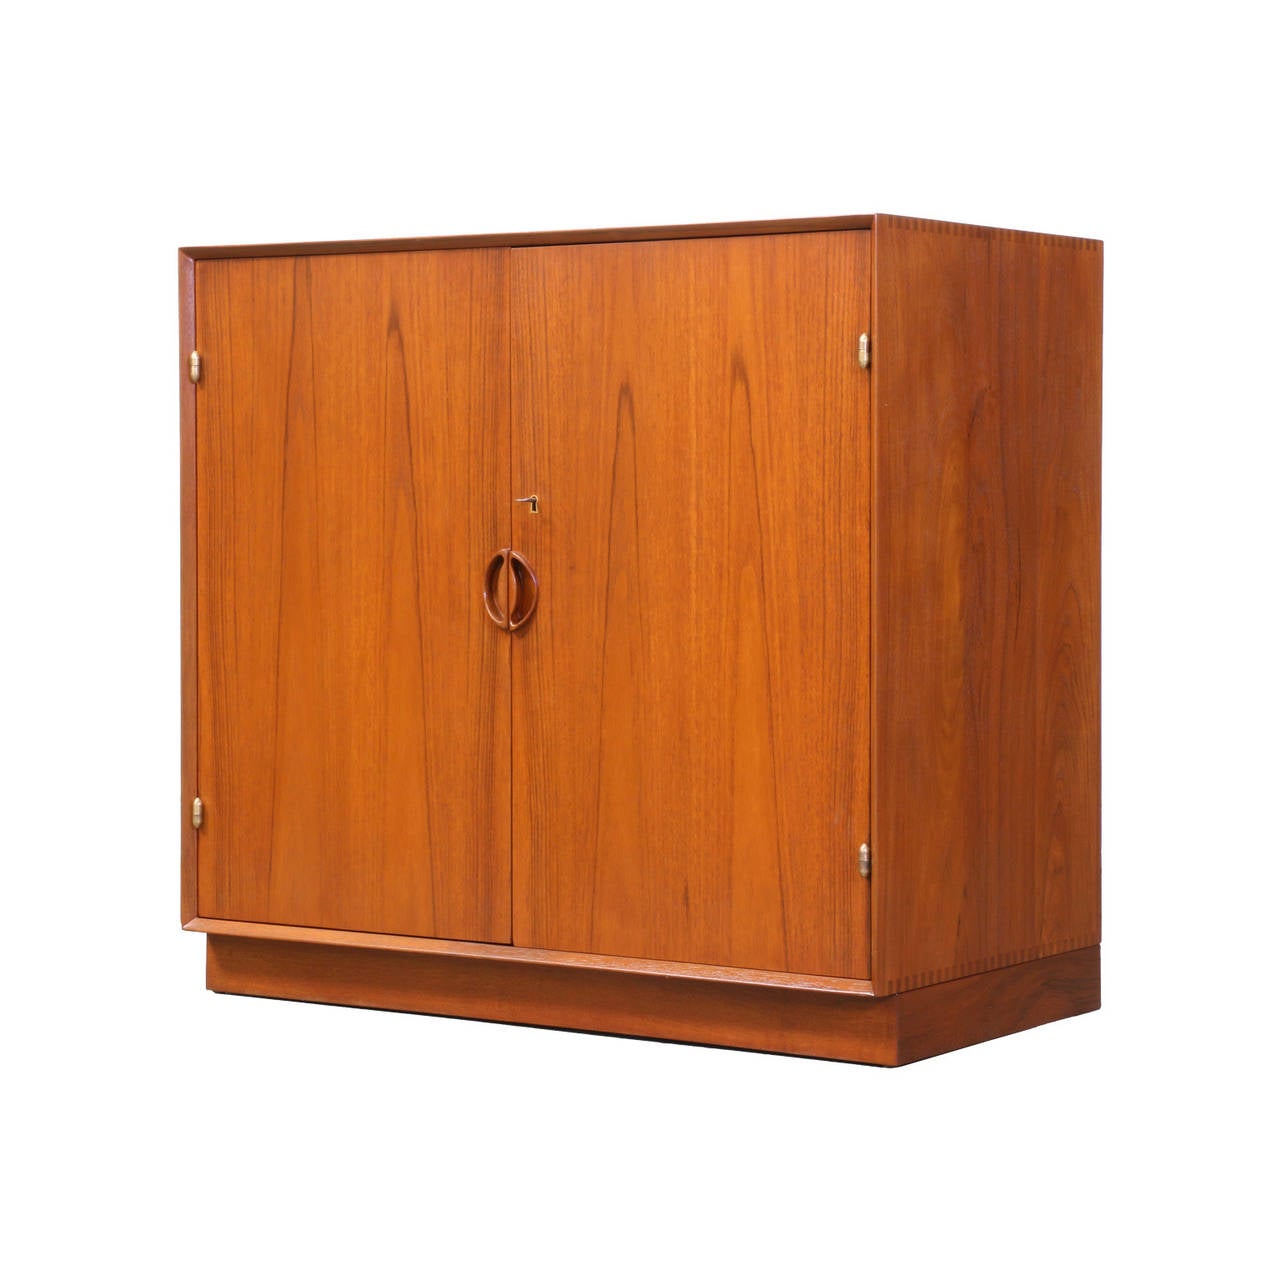 Designer: Peter Hvidt & Orla Molgaard-Nielsen
Manufacturer: Soborg Møbelfabrik
Period/Style: Danish Modern
Country: Denmark
Date: 1950s

Dimensions: 33″H x 35.5″L x 19″W
Materials: Teak
Condition: Excellent – Newly Refinished
Number of